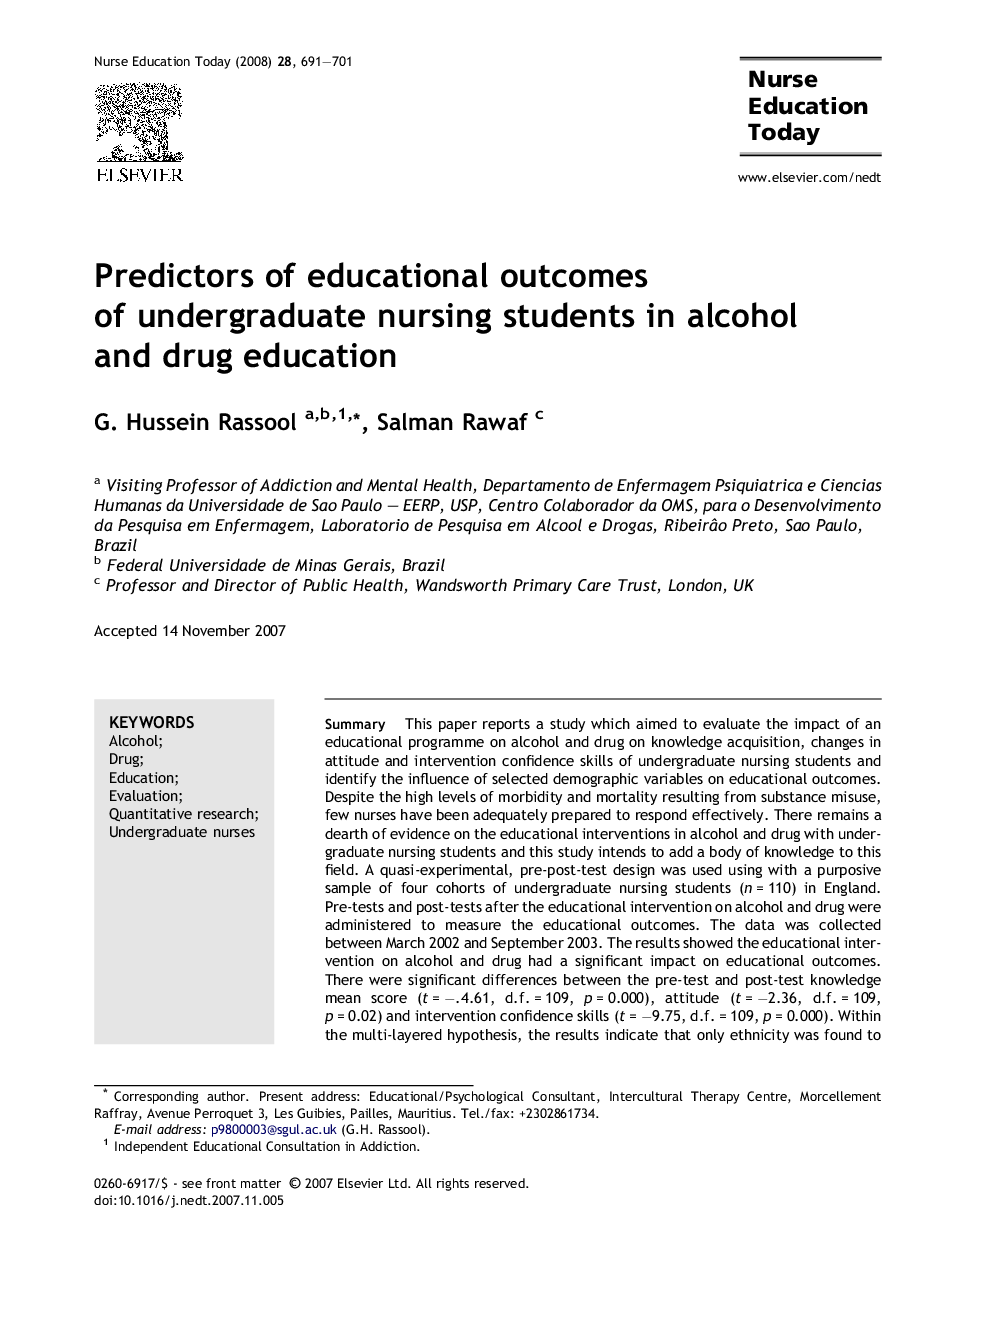 Predictors of educational outcomes of undergraduate nursing students in alcohol and drug education